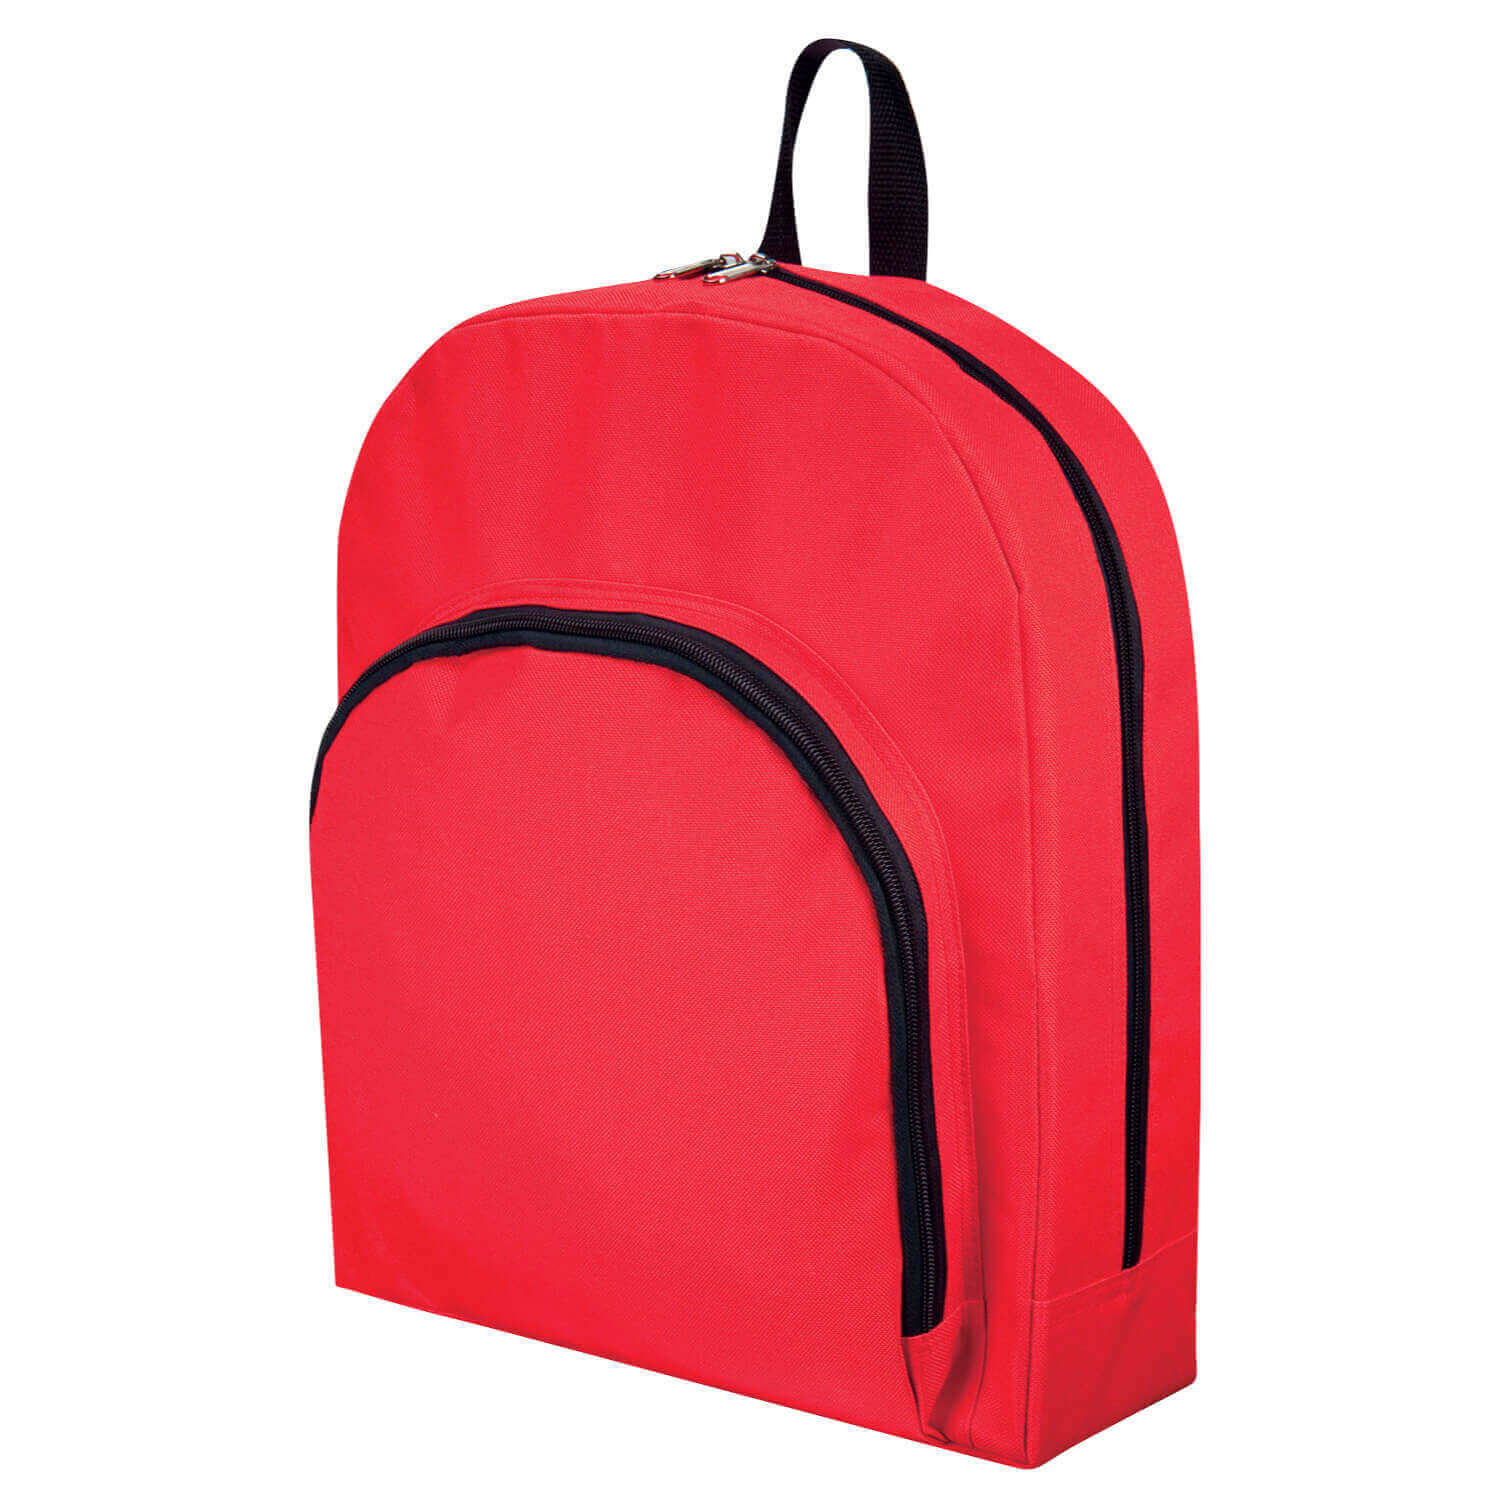 Spencer Backpack - Northline Printing & Promotional Products